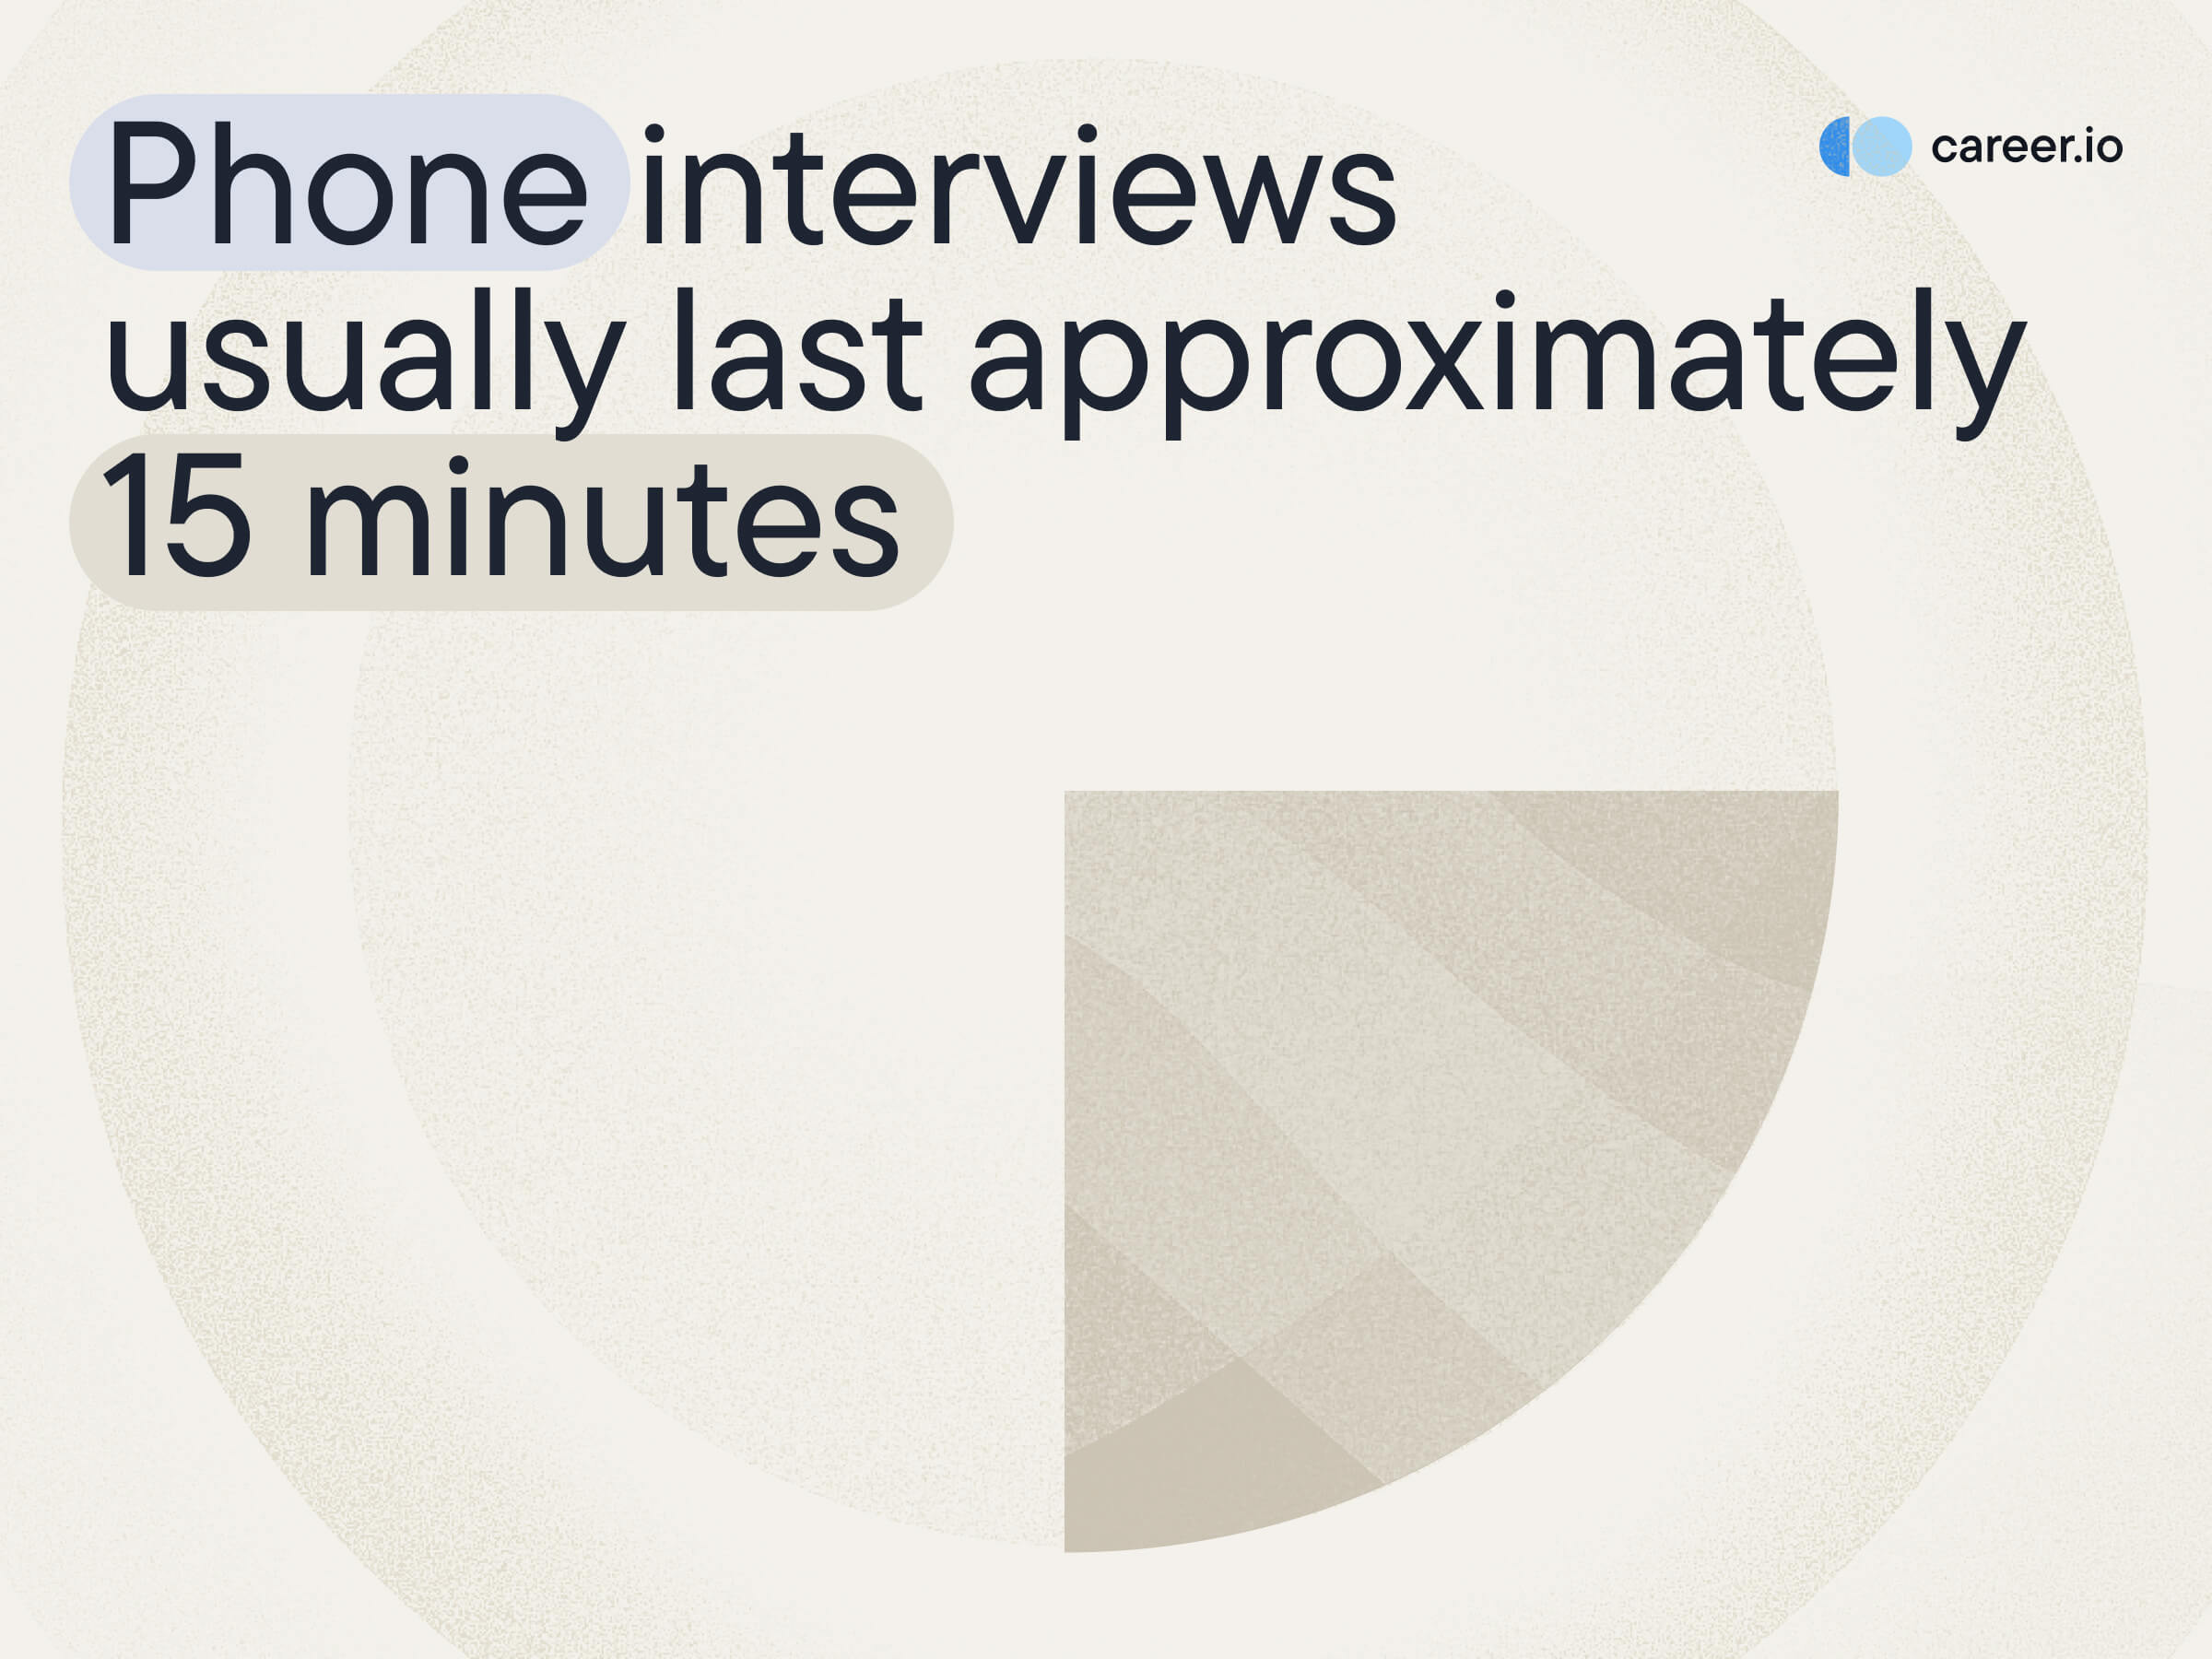 Do you want to shine in your next phone interview Check out these phone interview tips